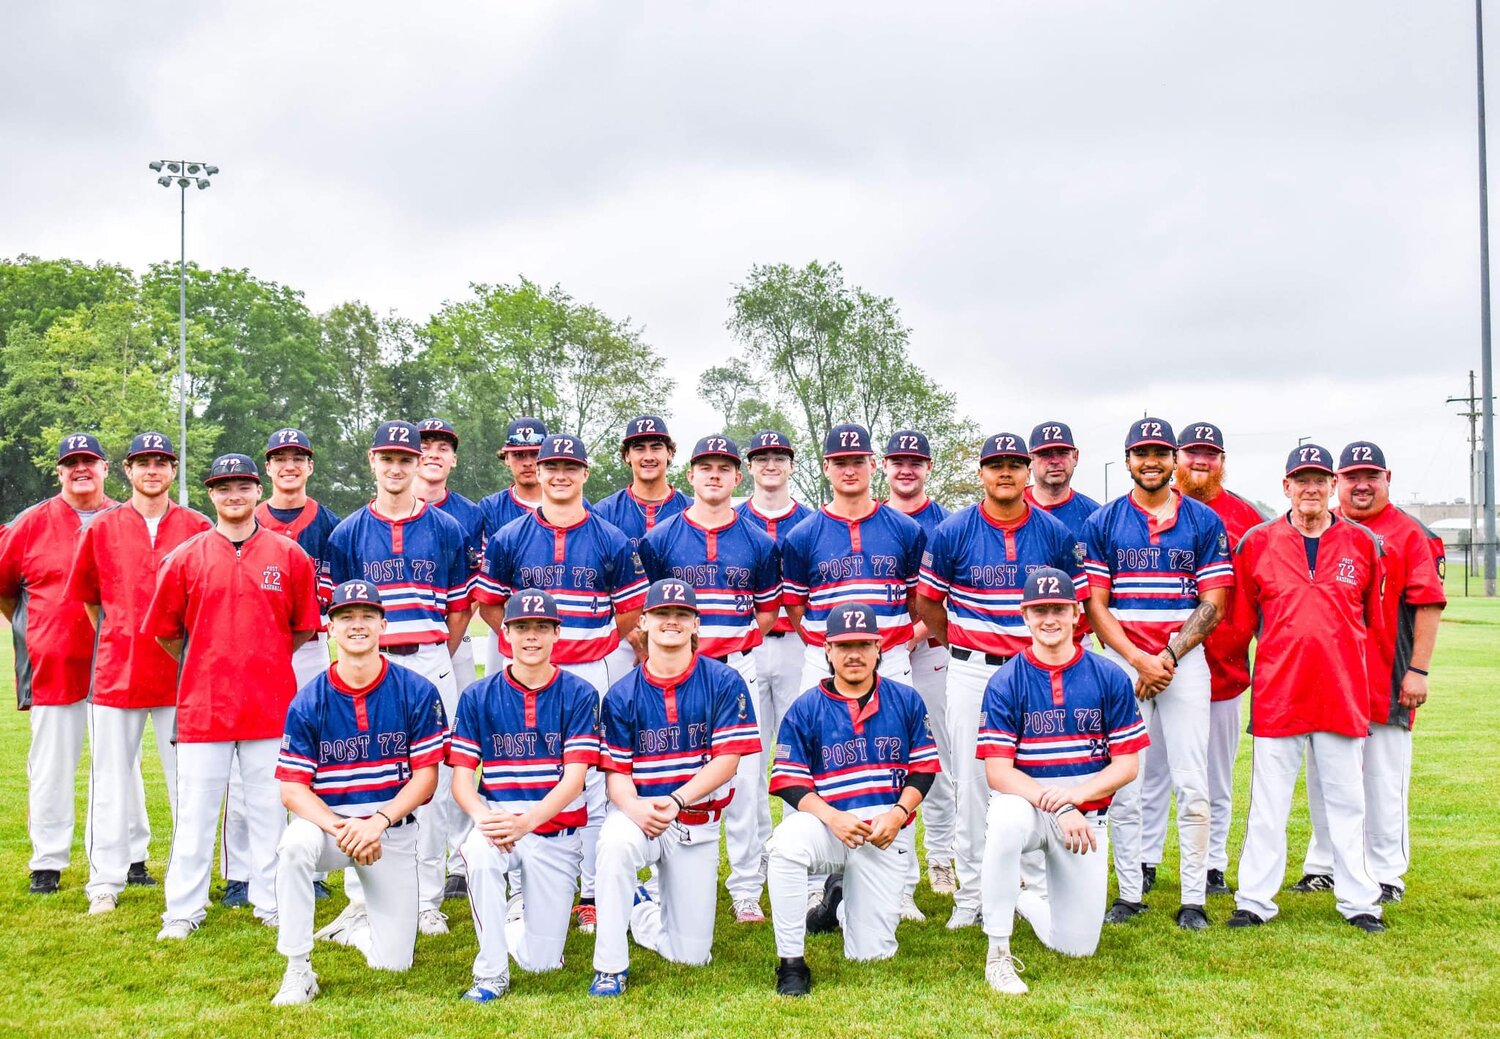 This year's American Legion Byron Cox Post 72 team is off to a 3-0 start and looks to have another successful season this summer.